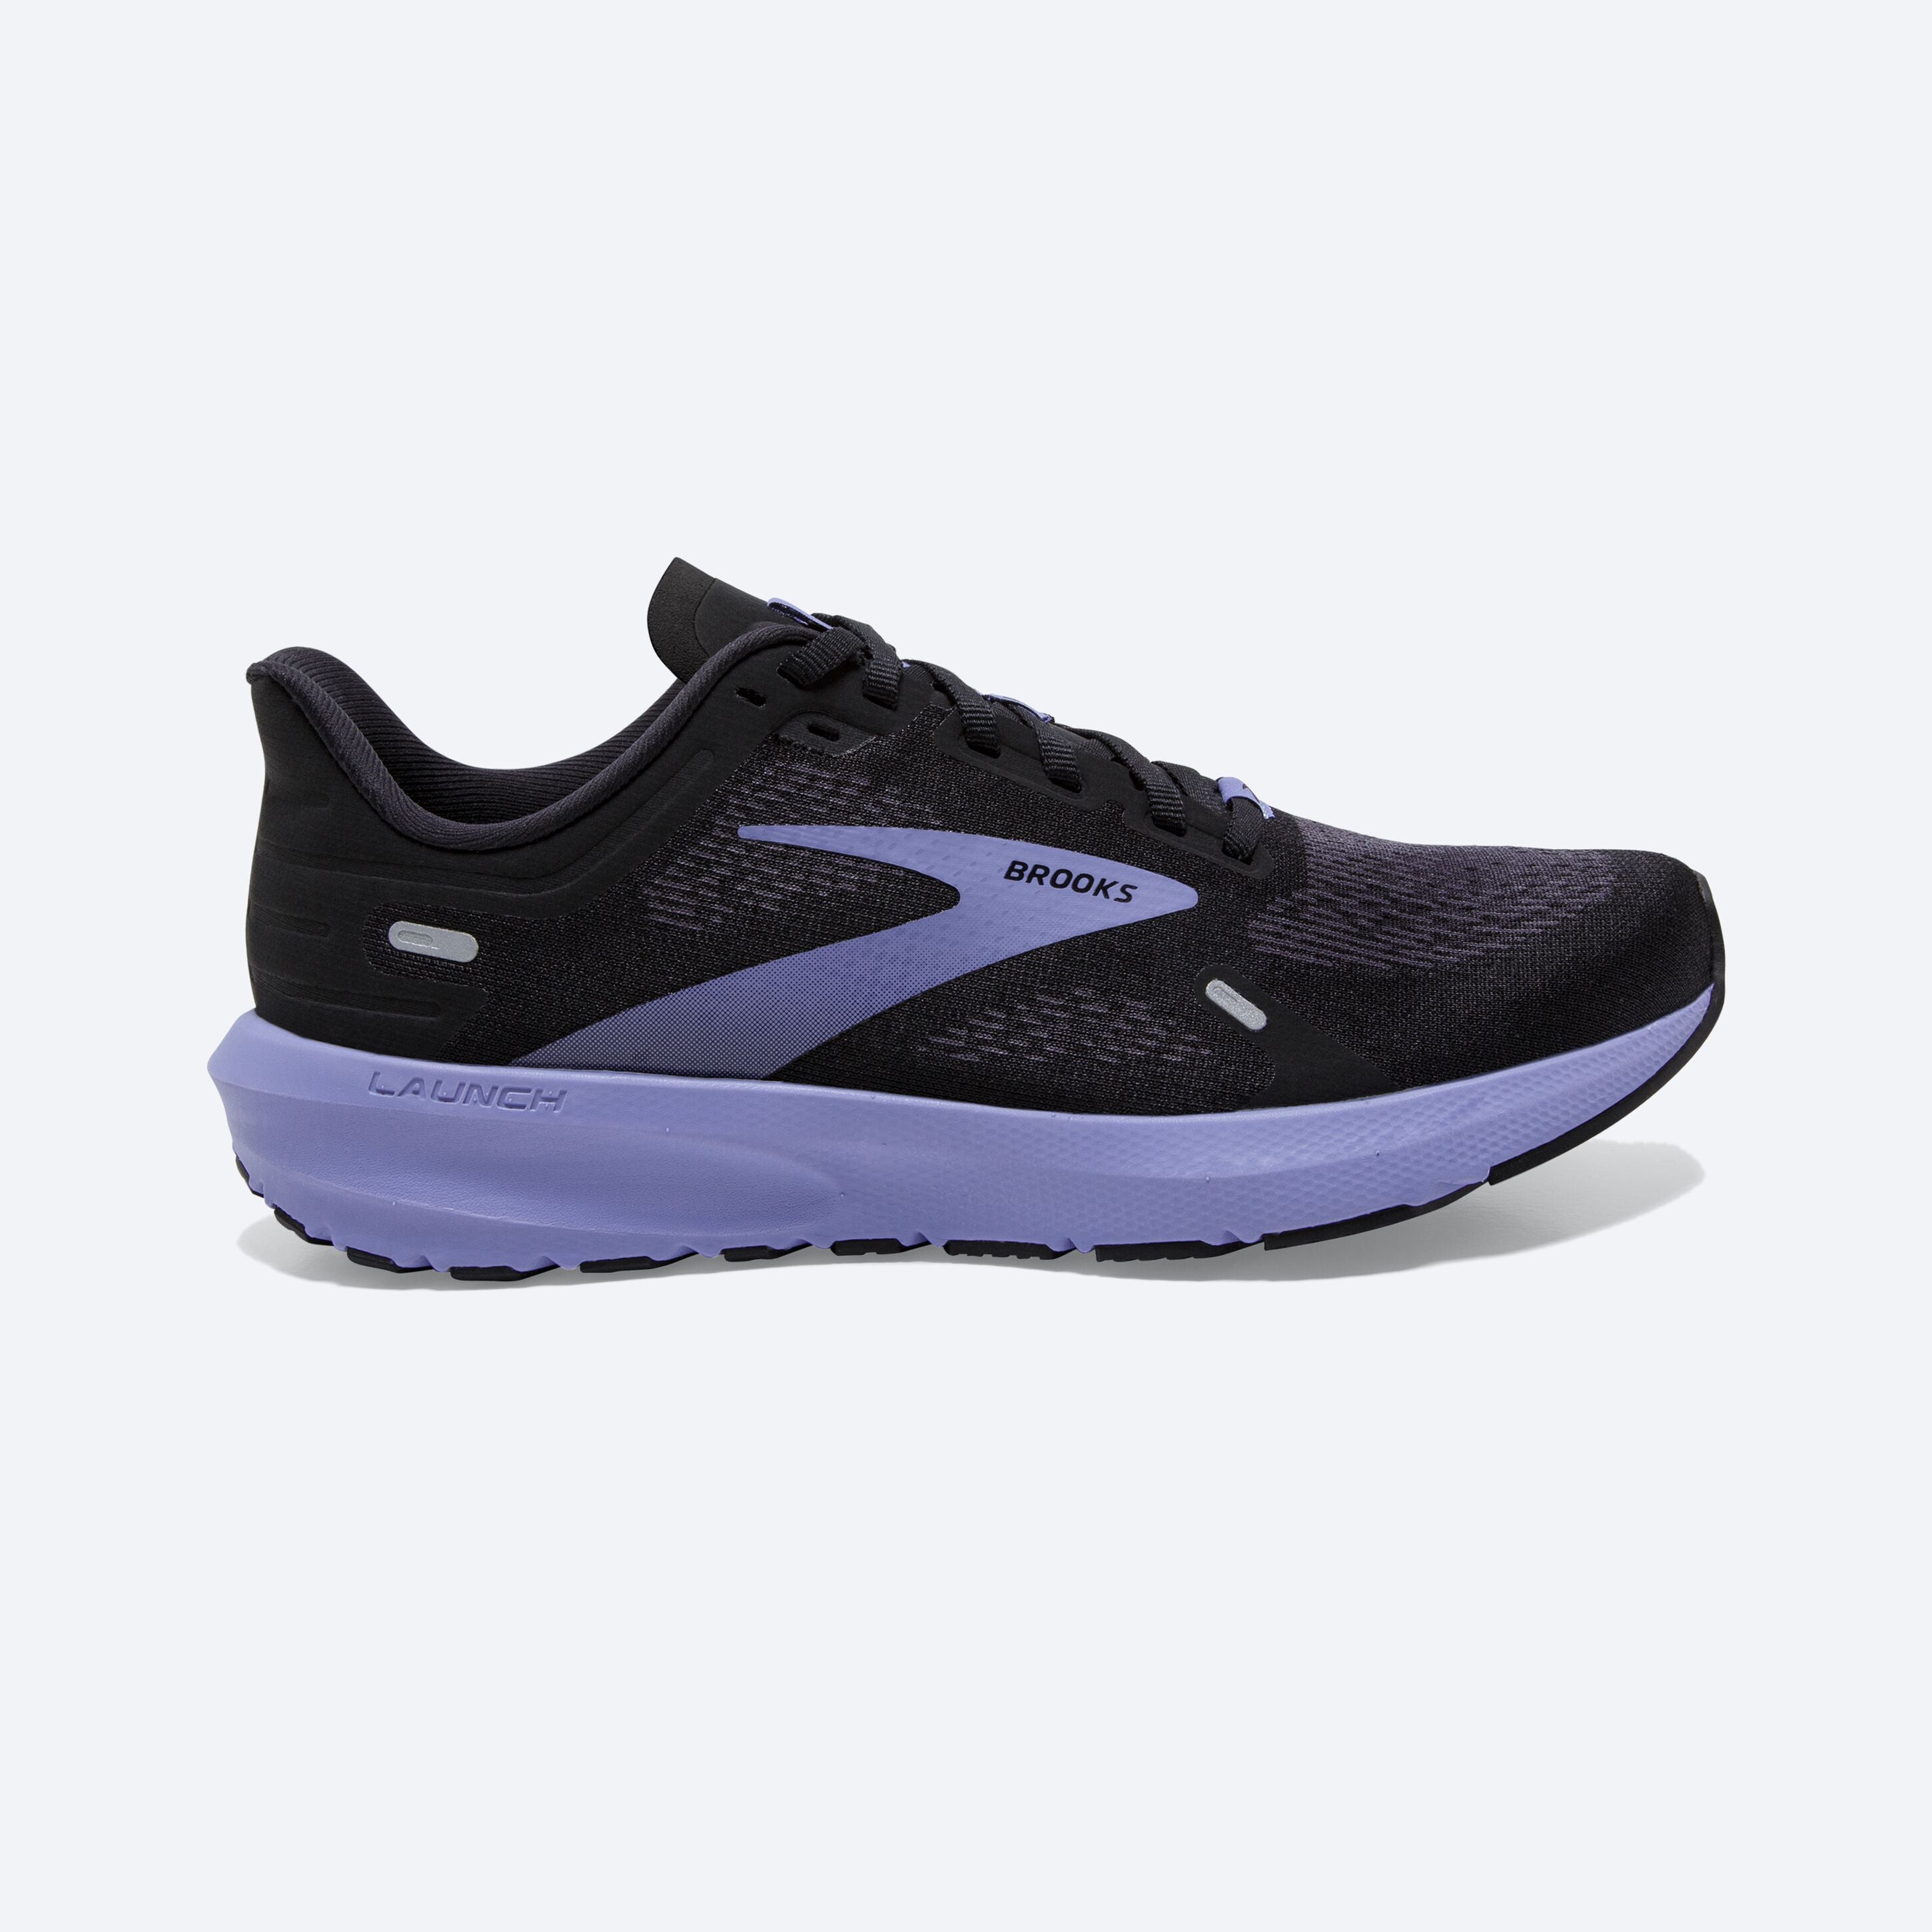 A women's neutral shoe that feels light and speedy and adds fun to every mile. The Brooks Launch 9 is designed with streamlined materials and a forefoot that propels you forward on race day or everyday runs.